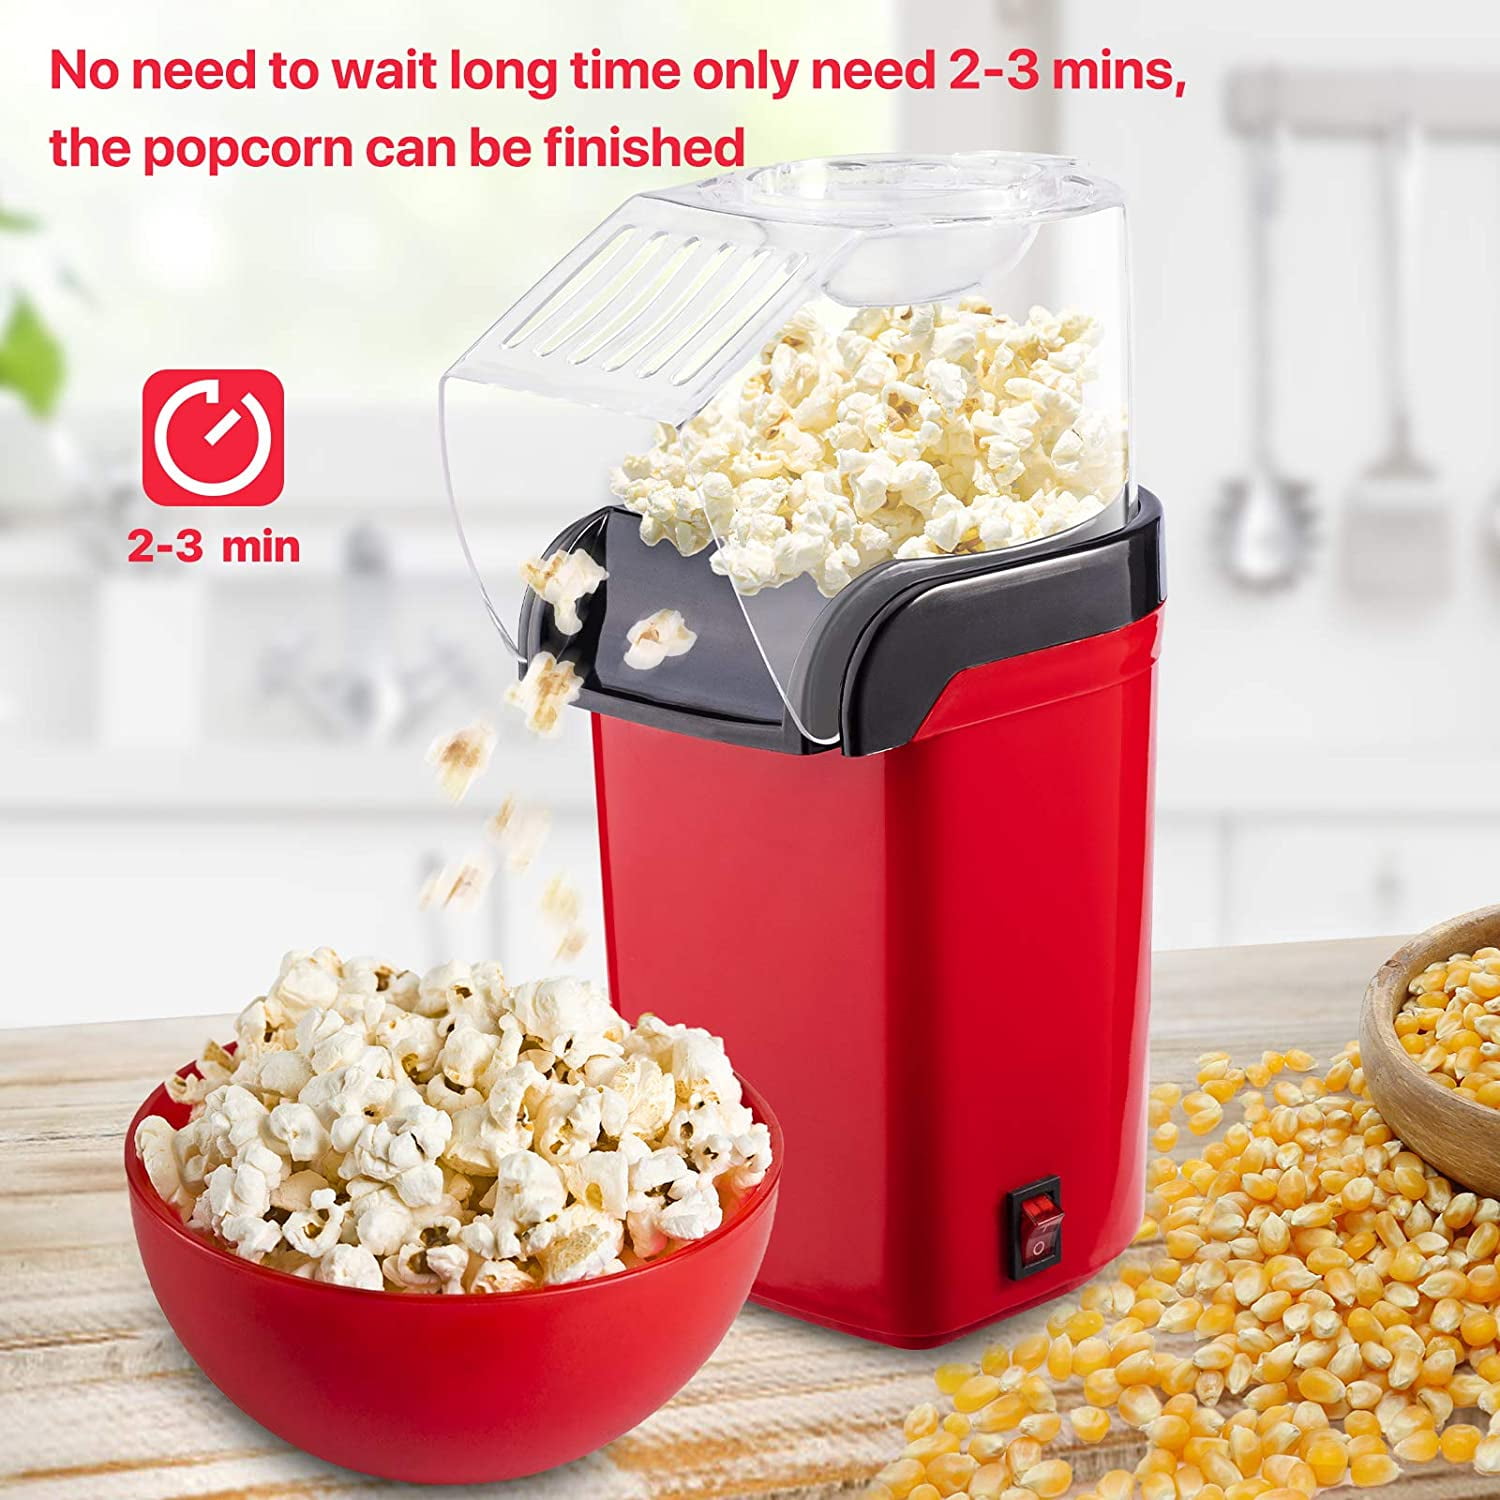 Popcorn Maker Great for Family Gathering Oil-Free & Low-Fat Healthy Snack Easy to Clean Red 1200W Fast Hot Air Popcorn Popper with Measuring Cup and Removable Container 